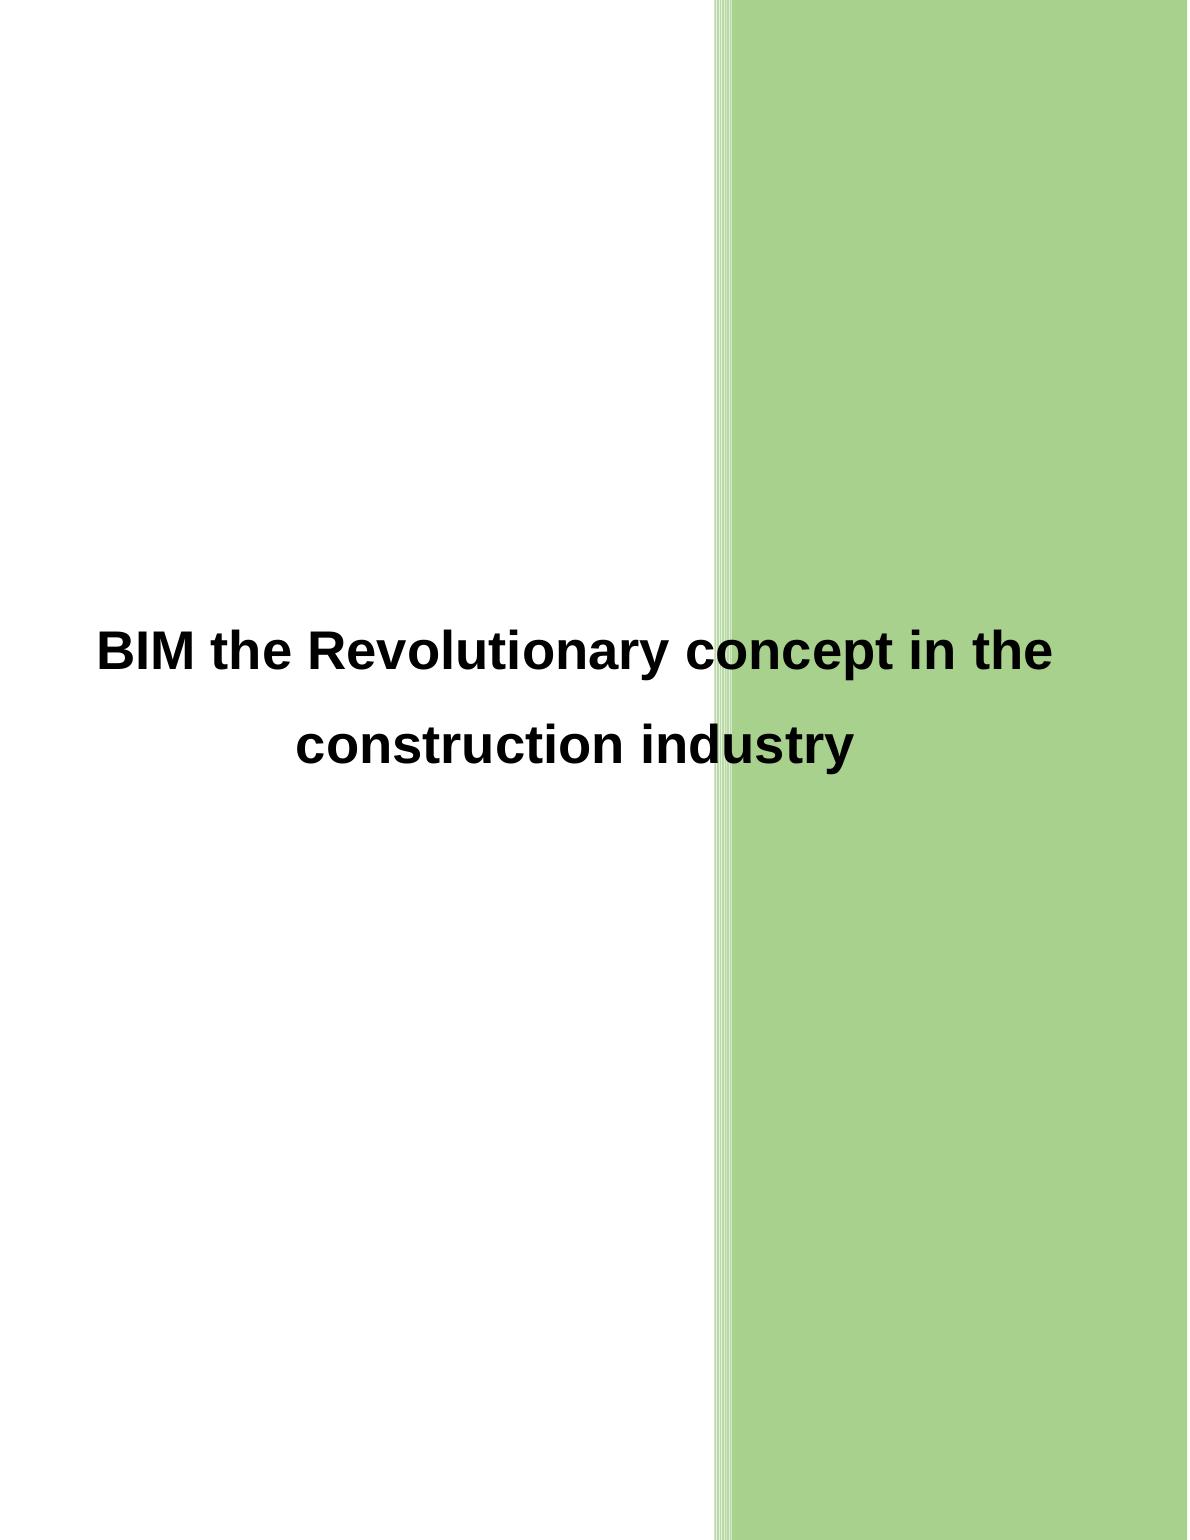 The Revolutionary concept in the construction industry._1